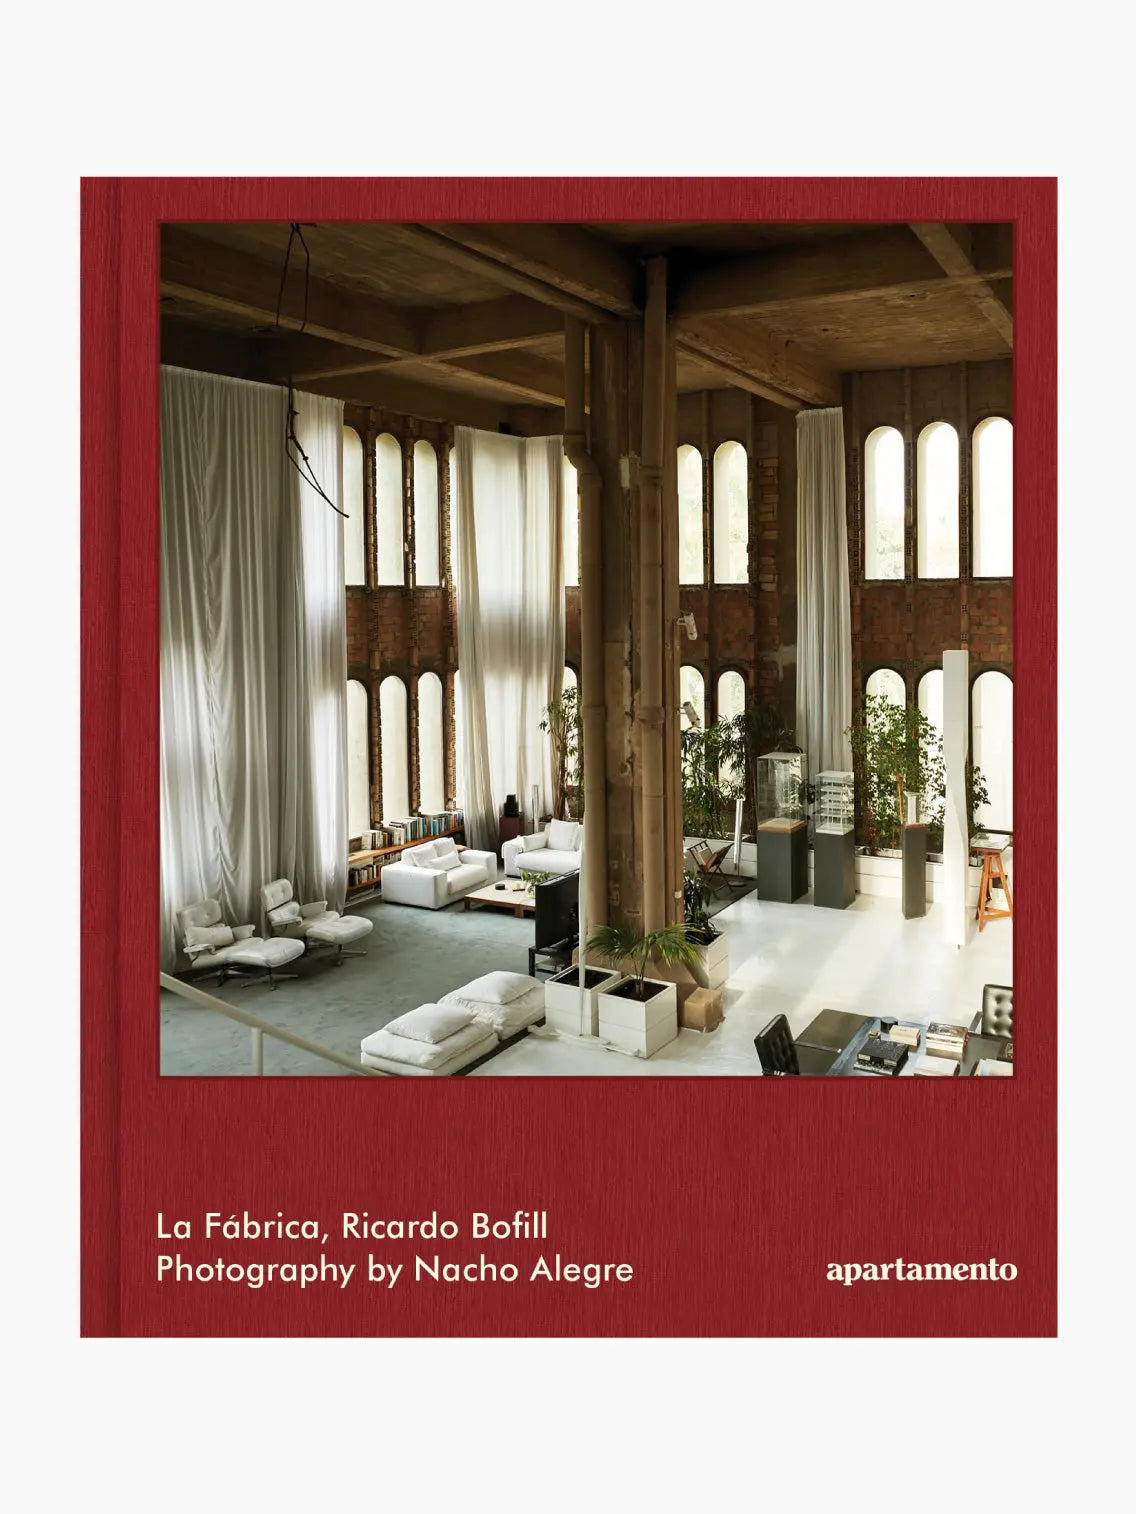 Interior view of La Fábrica, Ricardo Bofill, showing a spacious, high-ceilinged room with large arched windows, white sofas, and tall indoor plants. Exposed brick walls and wooden beams add to the rustic yet modern aesthetic of this Barcelona gem. Text at the bottom credits Ricardo Bofill and Nacho Alegre. Brand name: Apartamento